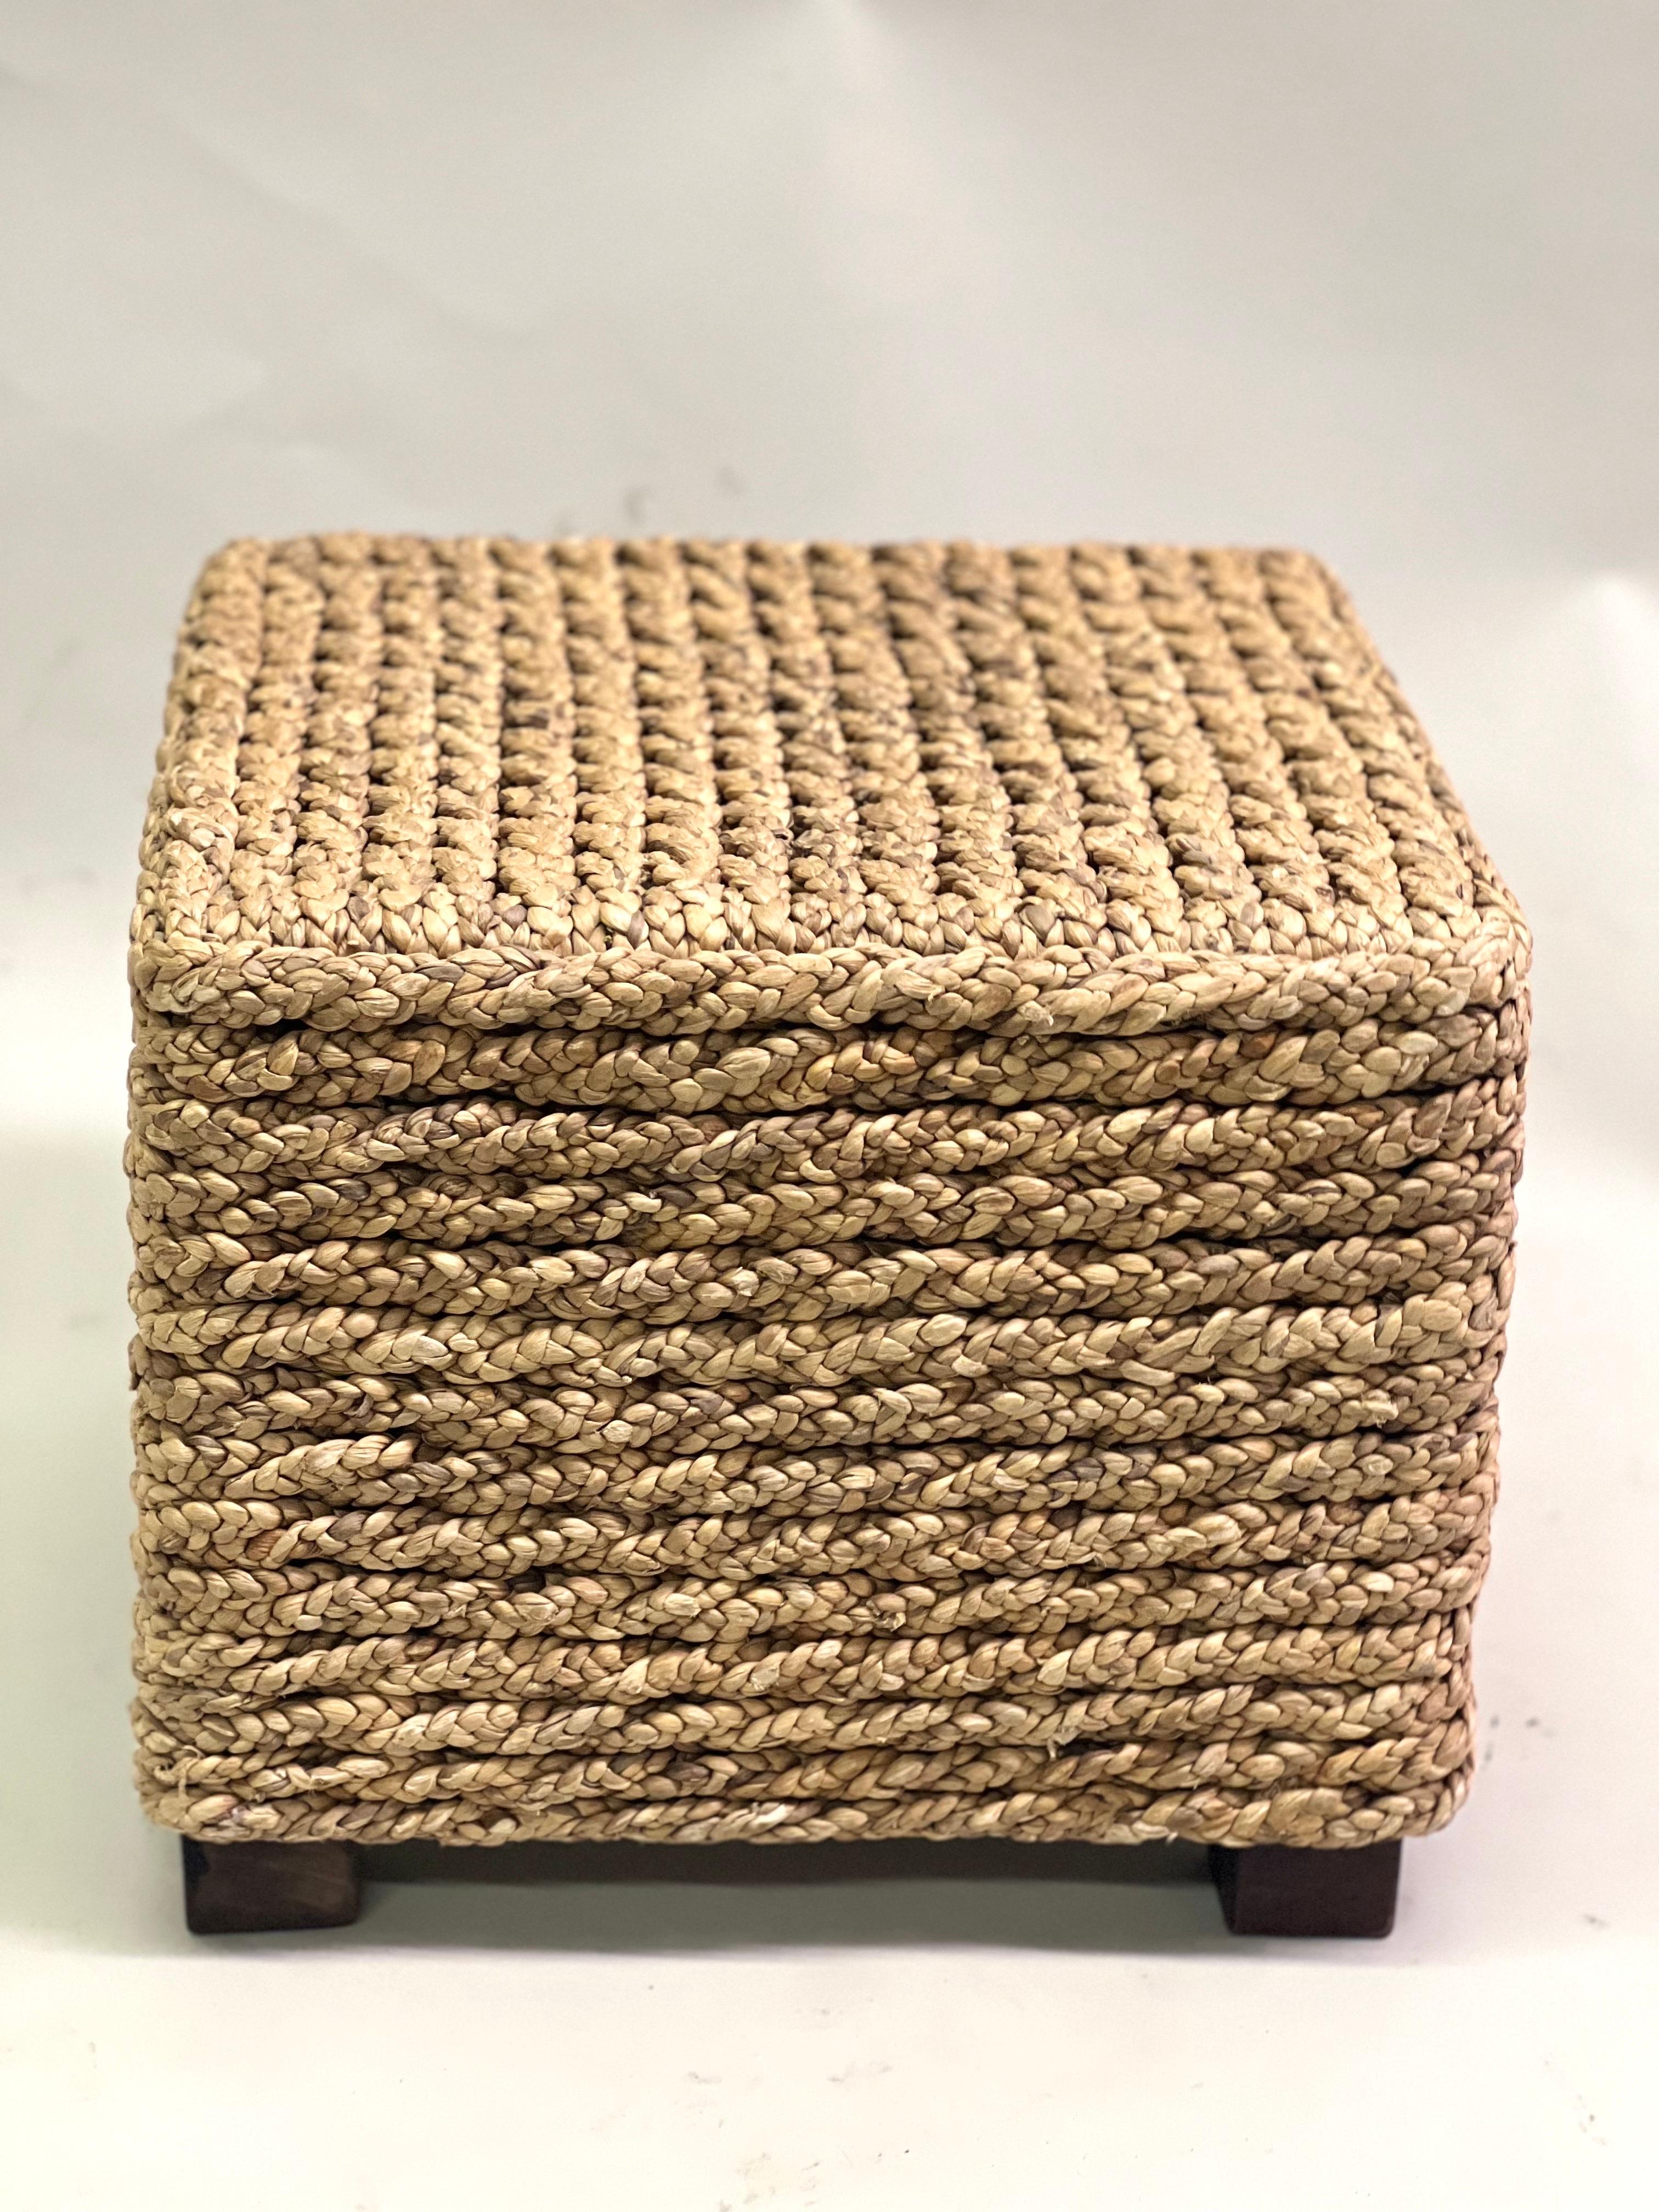 Pair of French Mid-Century Rope Stools / Benches by Adrien Audoux & Frida Minet In Good Condition For Sale In New York, NY